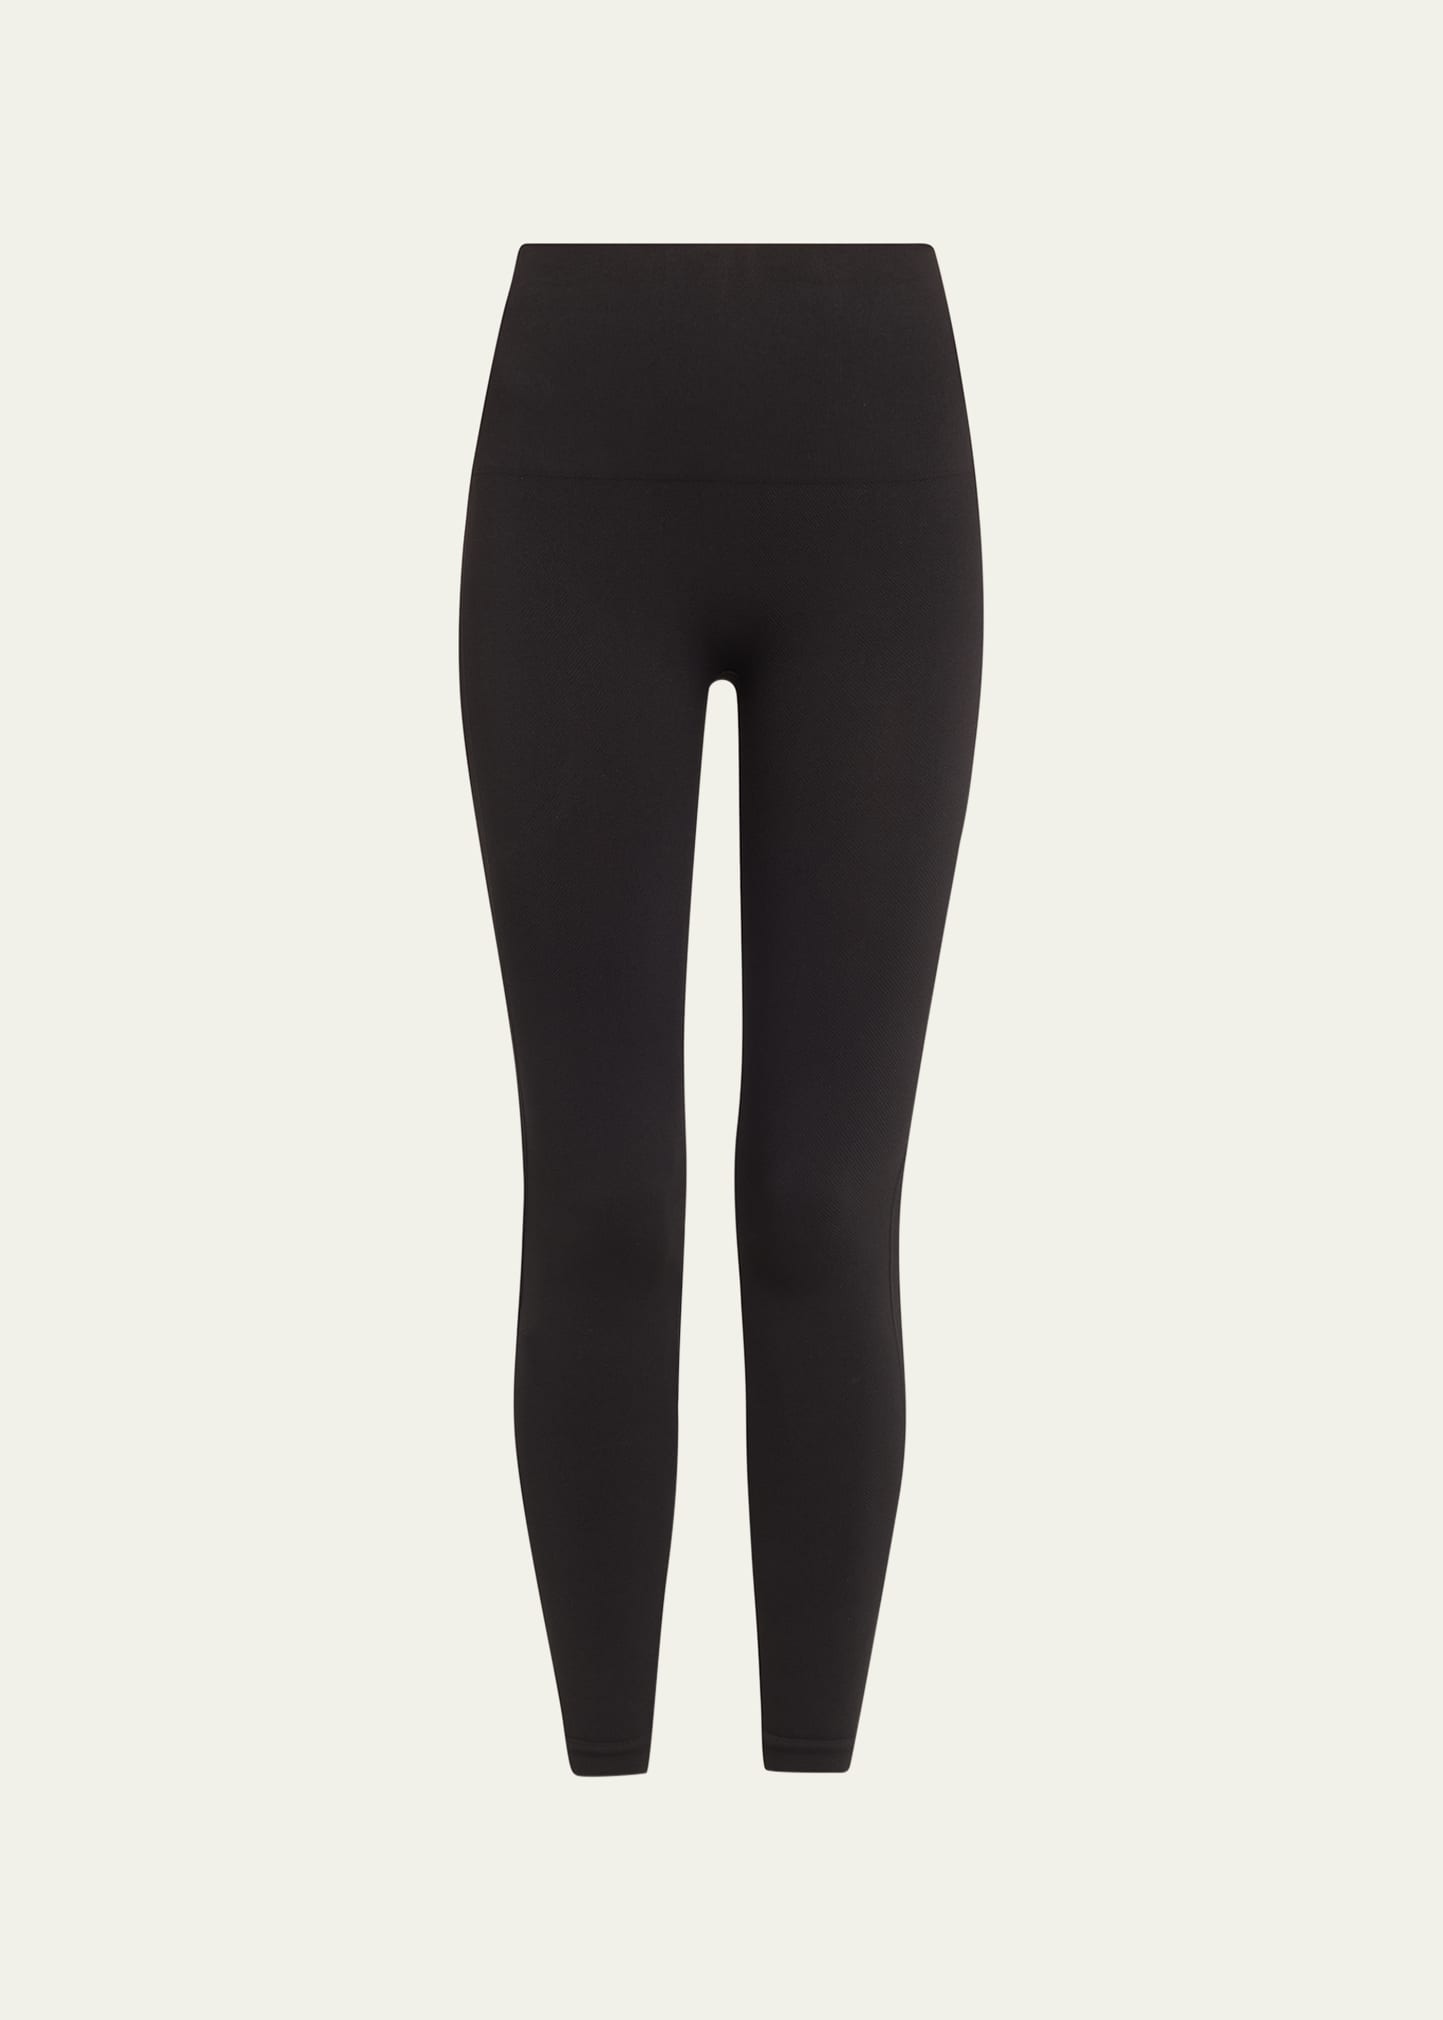 SPANX Pants for Women